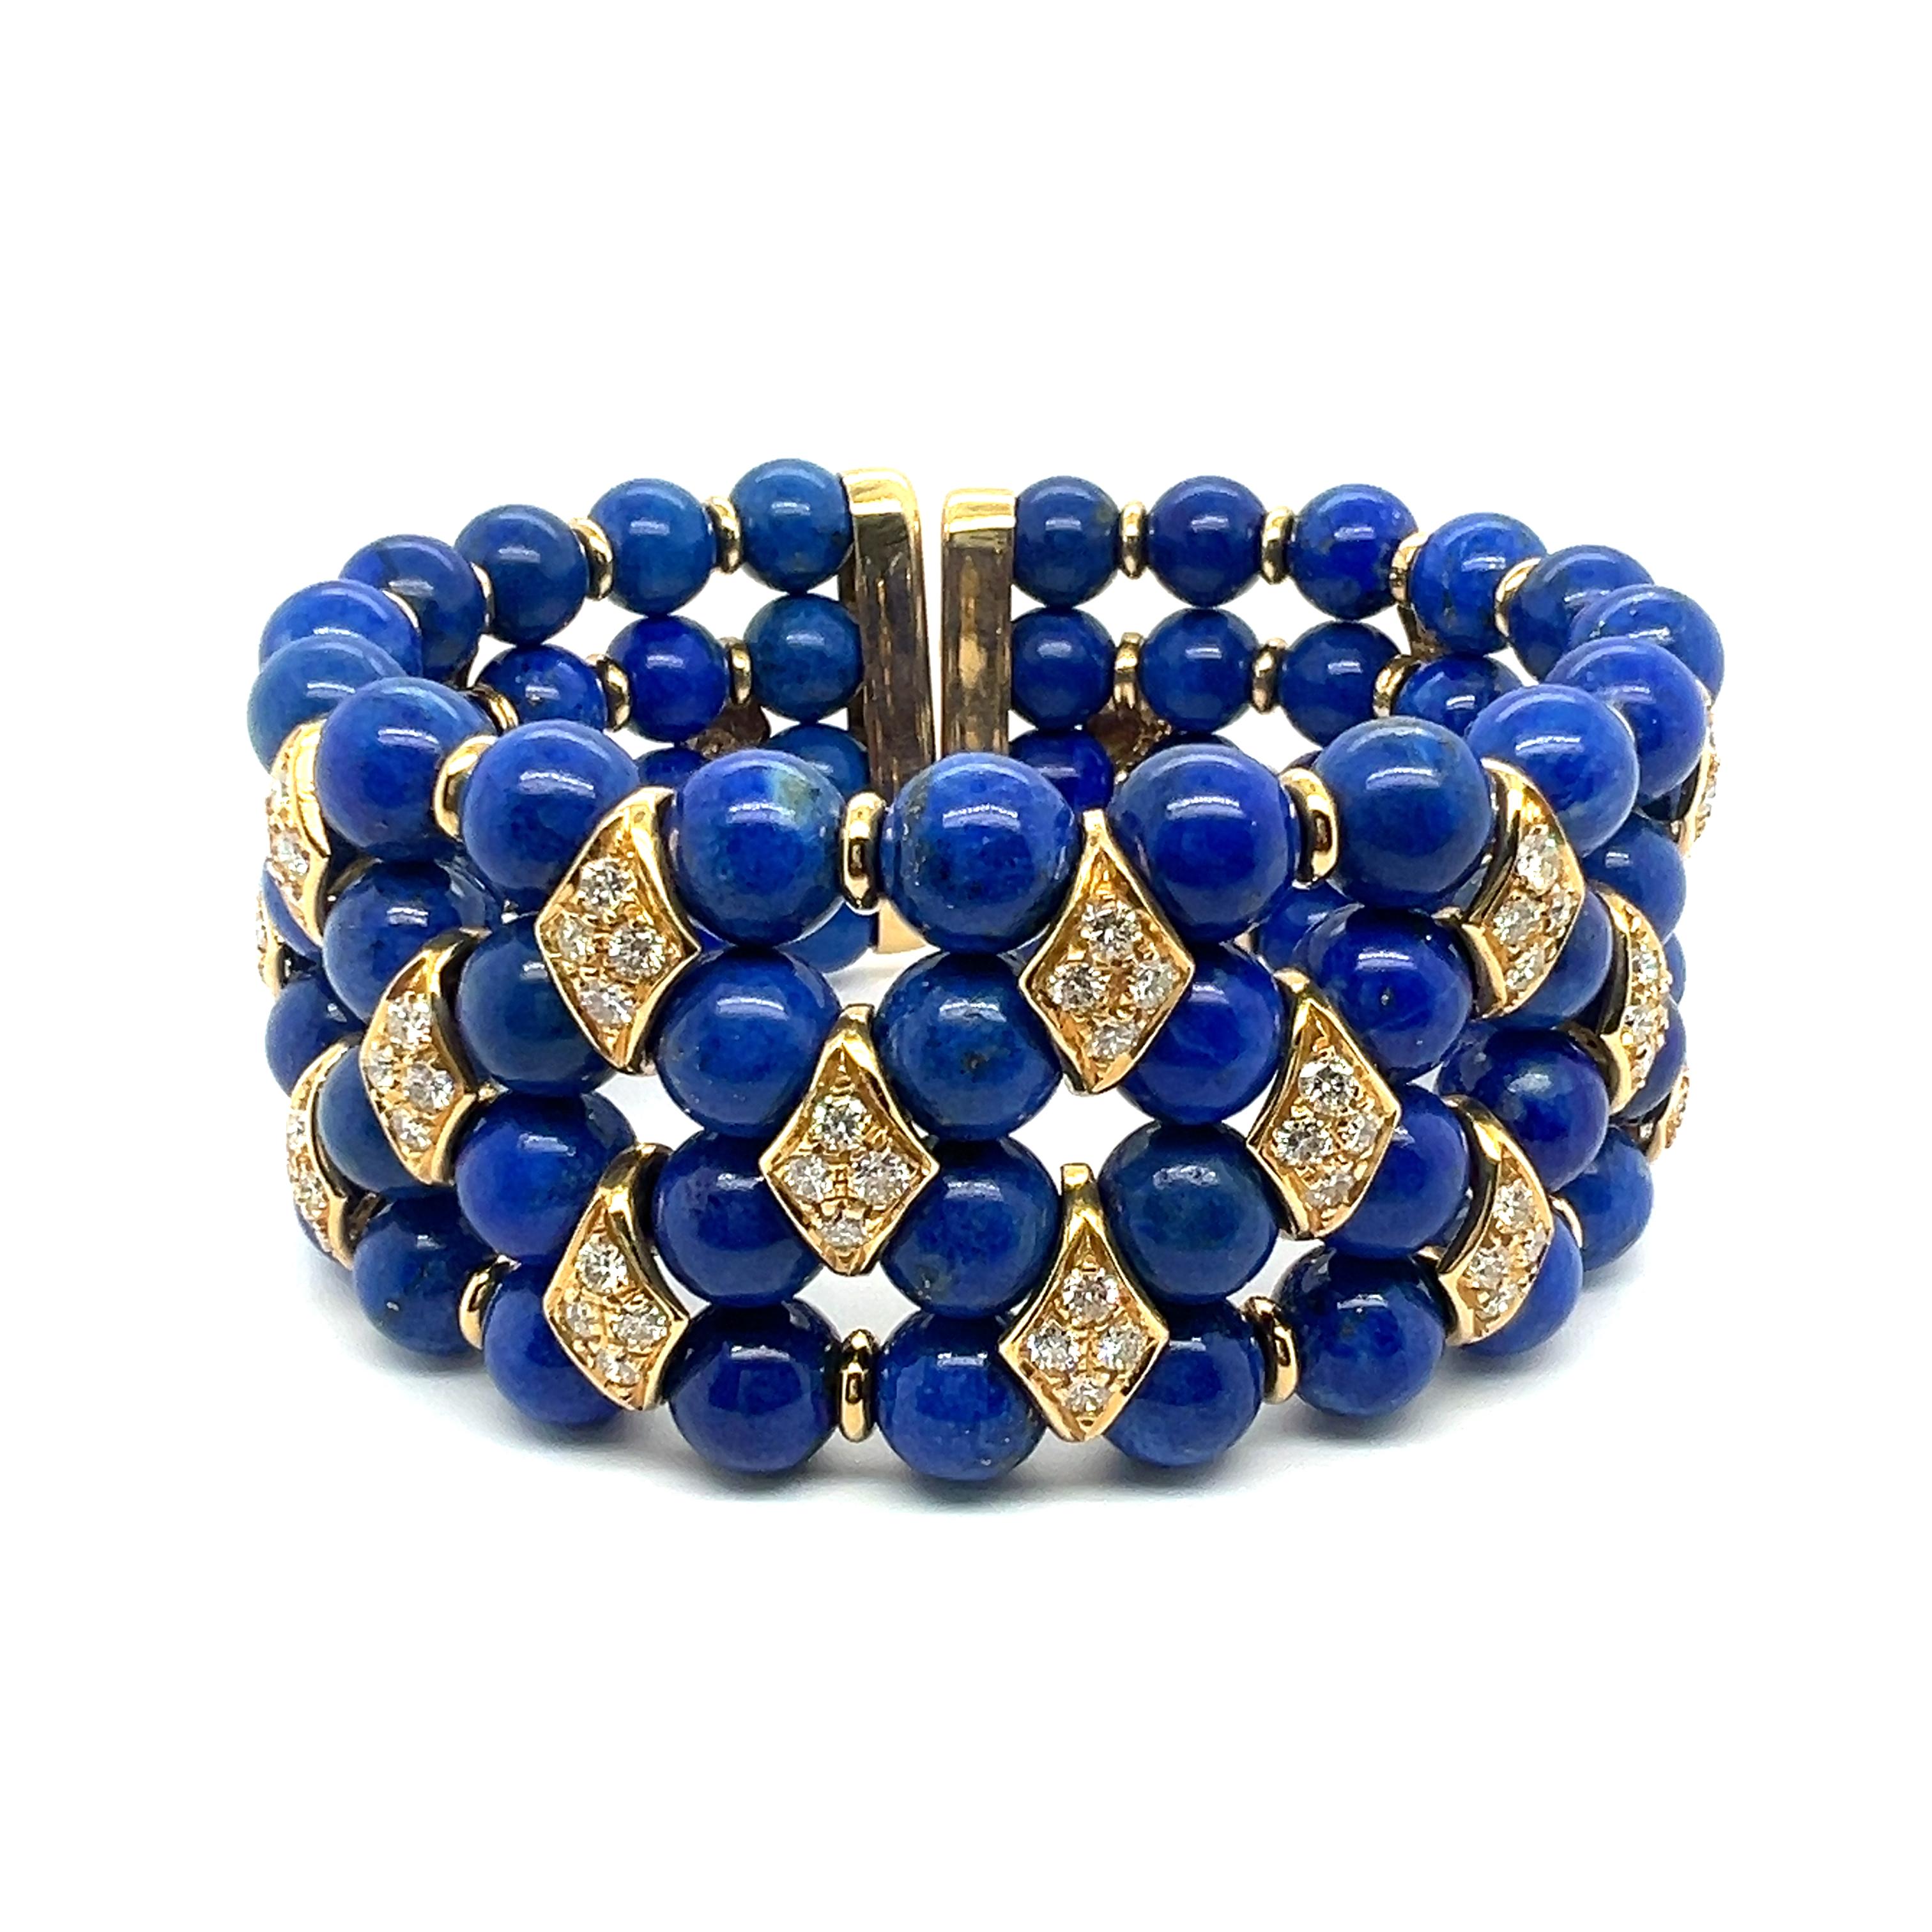 Elevate your style with this exquisite bracelet, where lapis lazuli intertwines with premium gold, yielding a harmonious blend of warm hues and textures, accented by the shimmer of beautiful diamonds.

This luxurious creation boasts 80 lapis lazuli